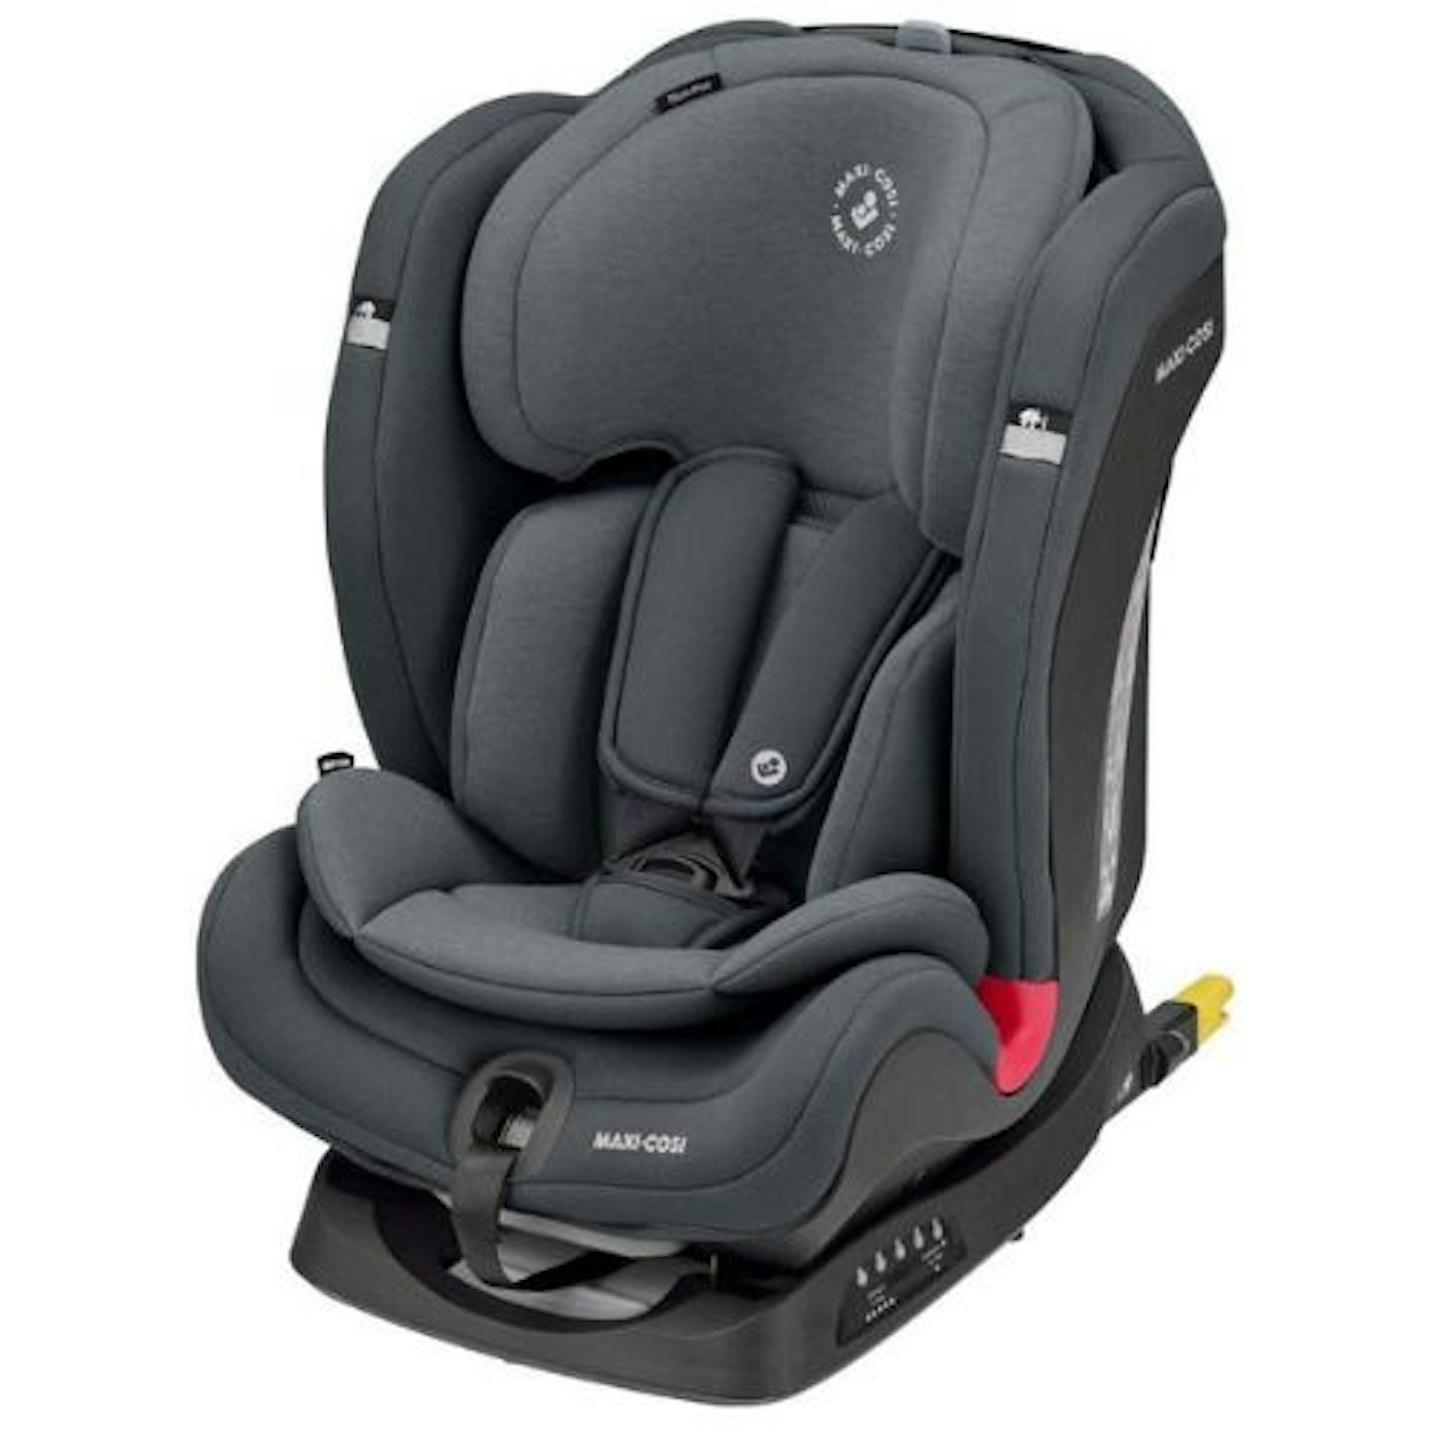 best car seats for 3 year olds - Maxi-Cosi Titan Plus Comfortable Toddler/Child Car Seat